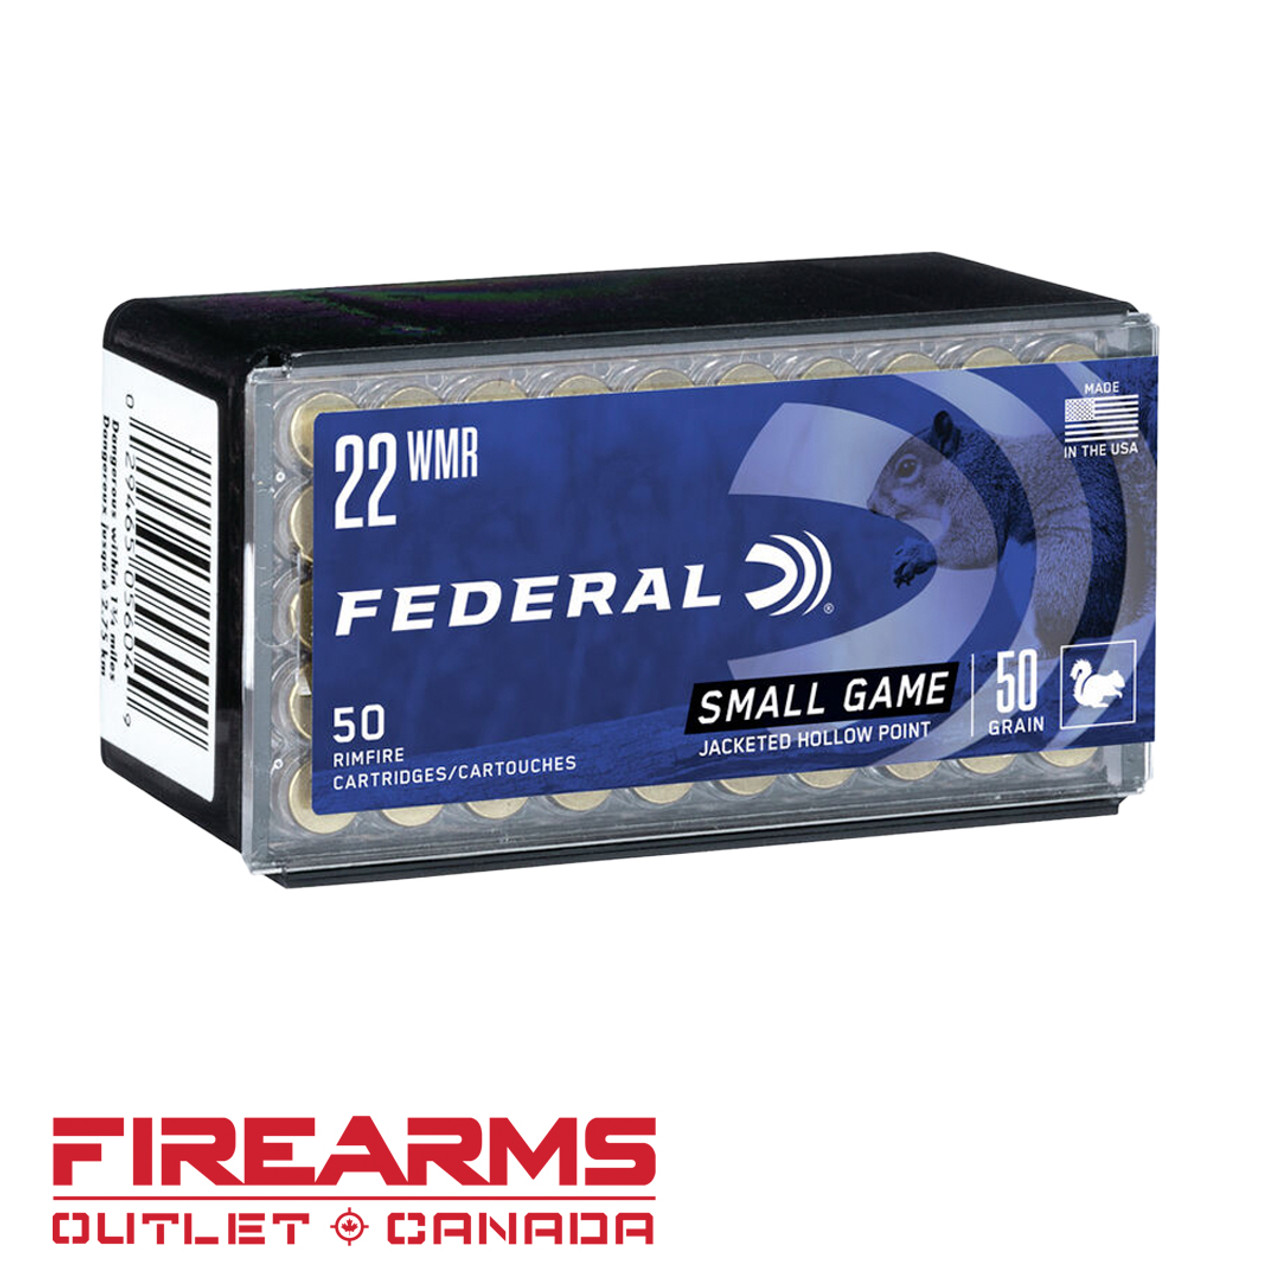 Federal Small Game - .22WMR, 50gr, JHP, Box of 50 [757]